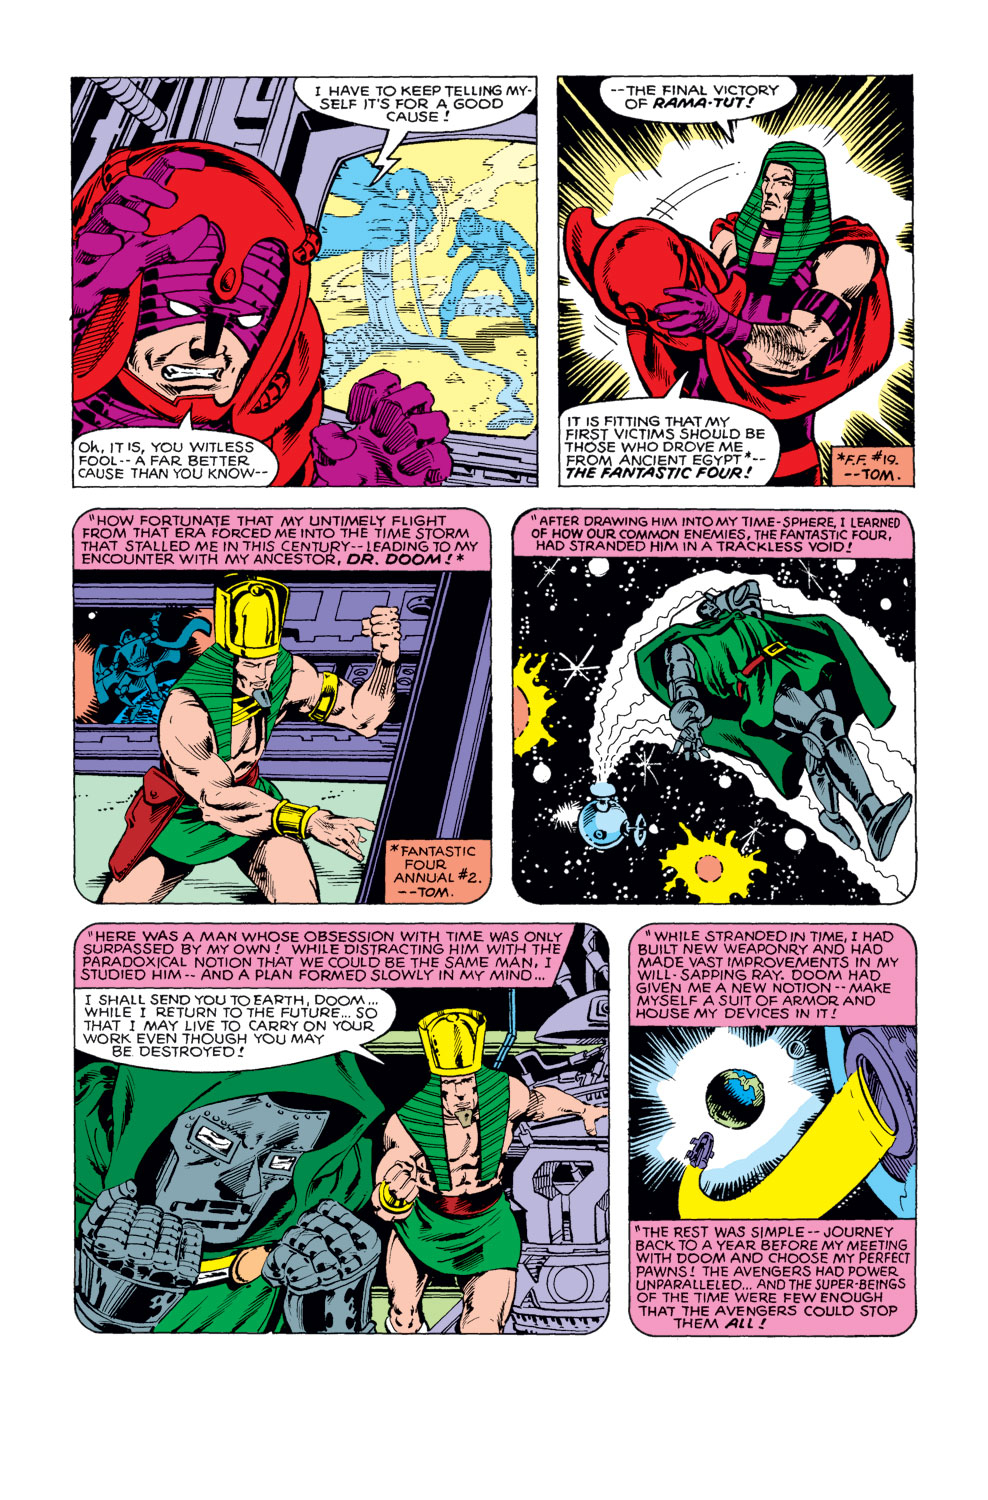 What If? (1977) issue 29 - The Avengers defeated everybody - Page 6